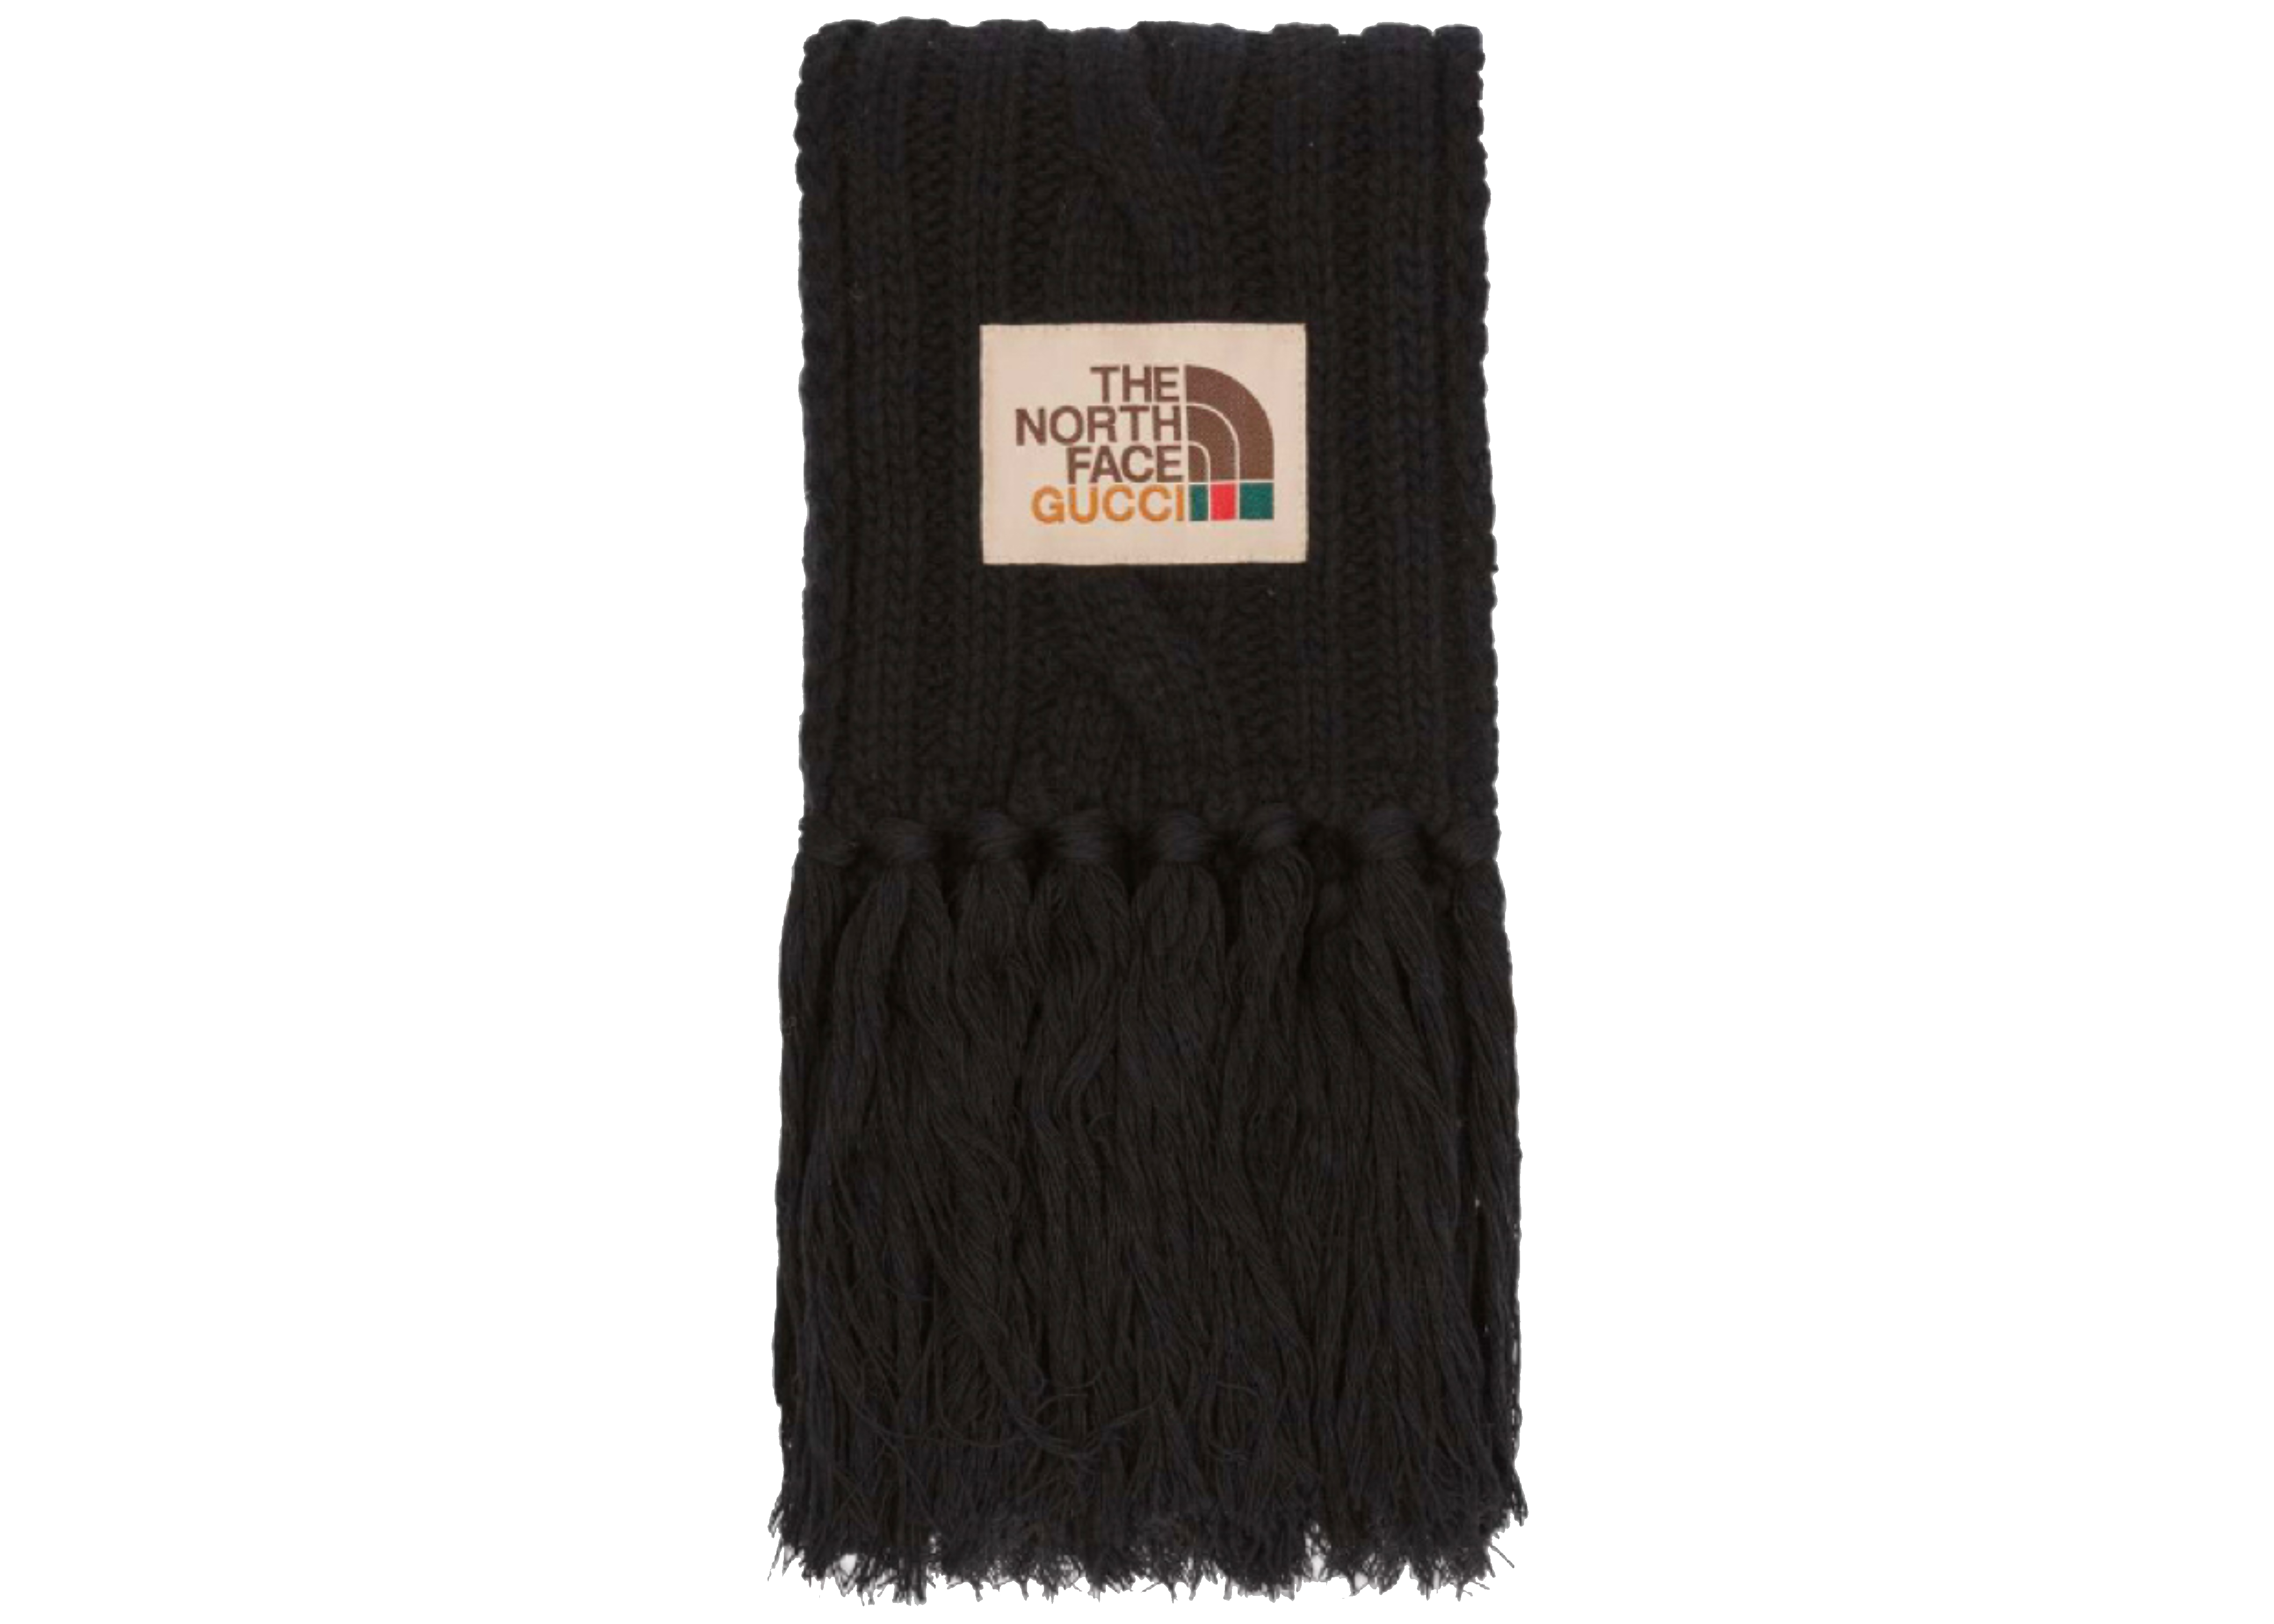 Gucci x The North Face Wool Scarf Black